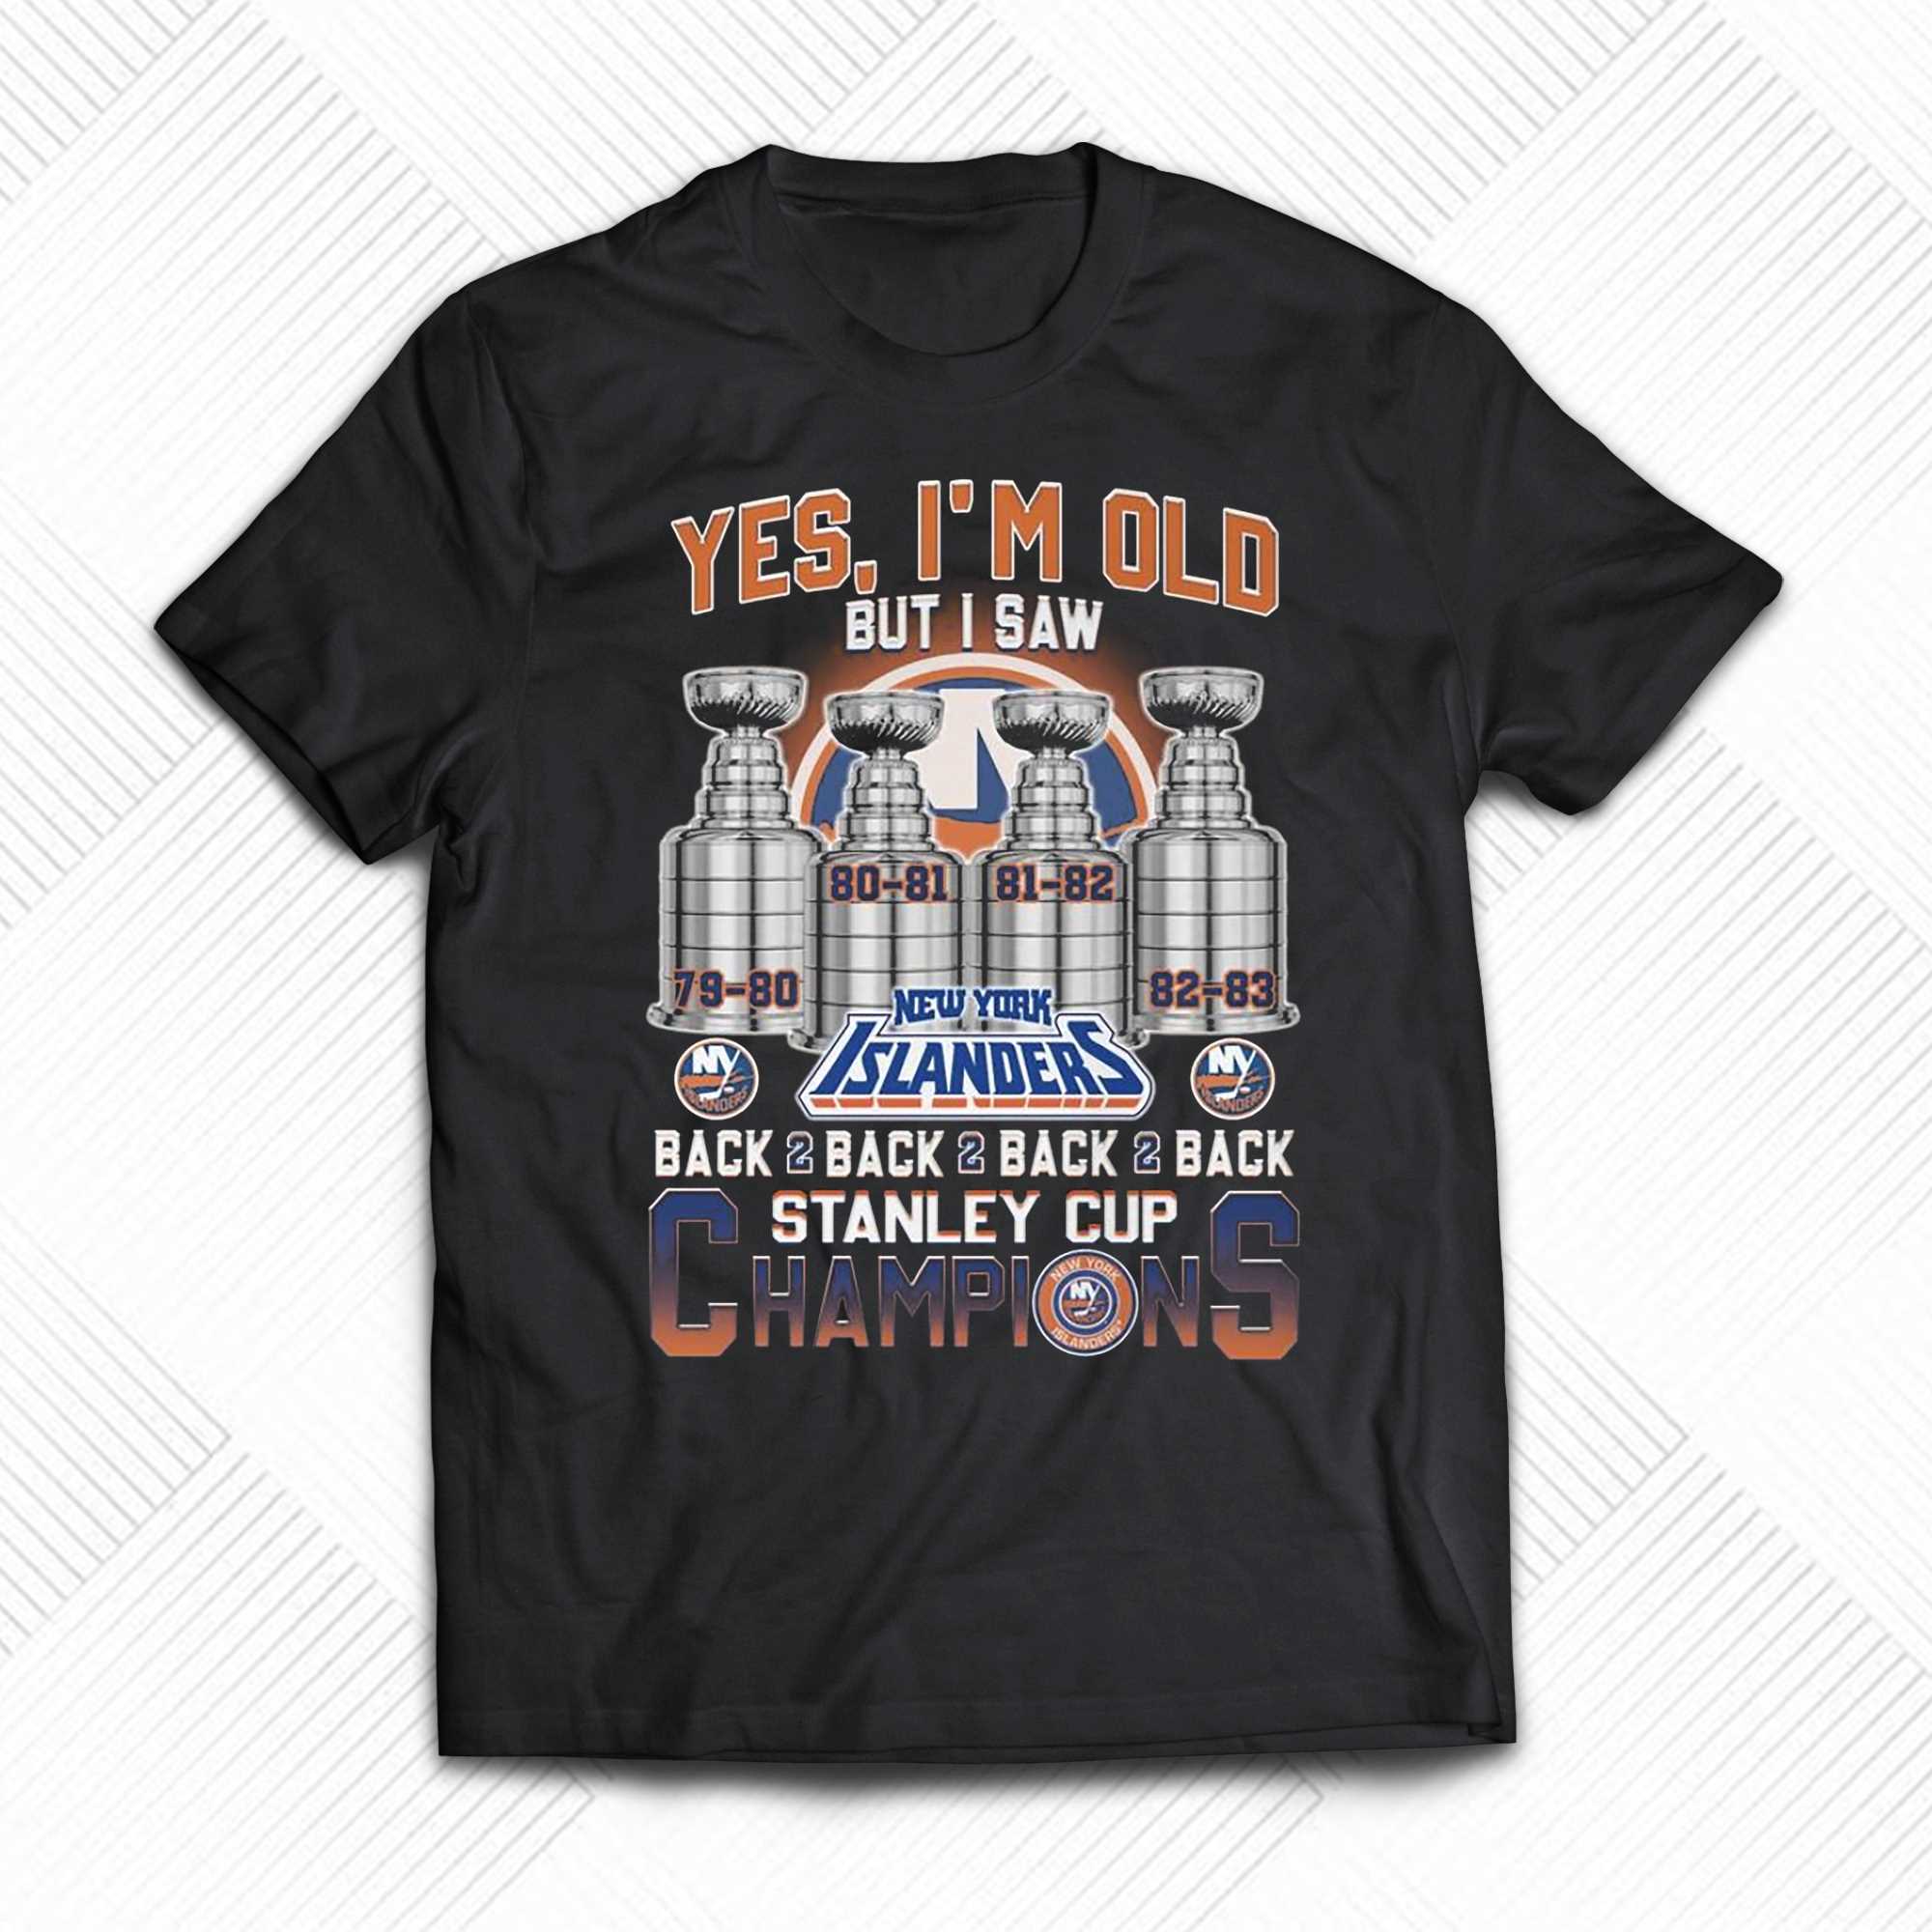 Yes I'm old but I saw New York Islanders back 2 back 2 back 2 back stanley  cup champions shirt, hoodie, sweatshirt and tank top